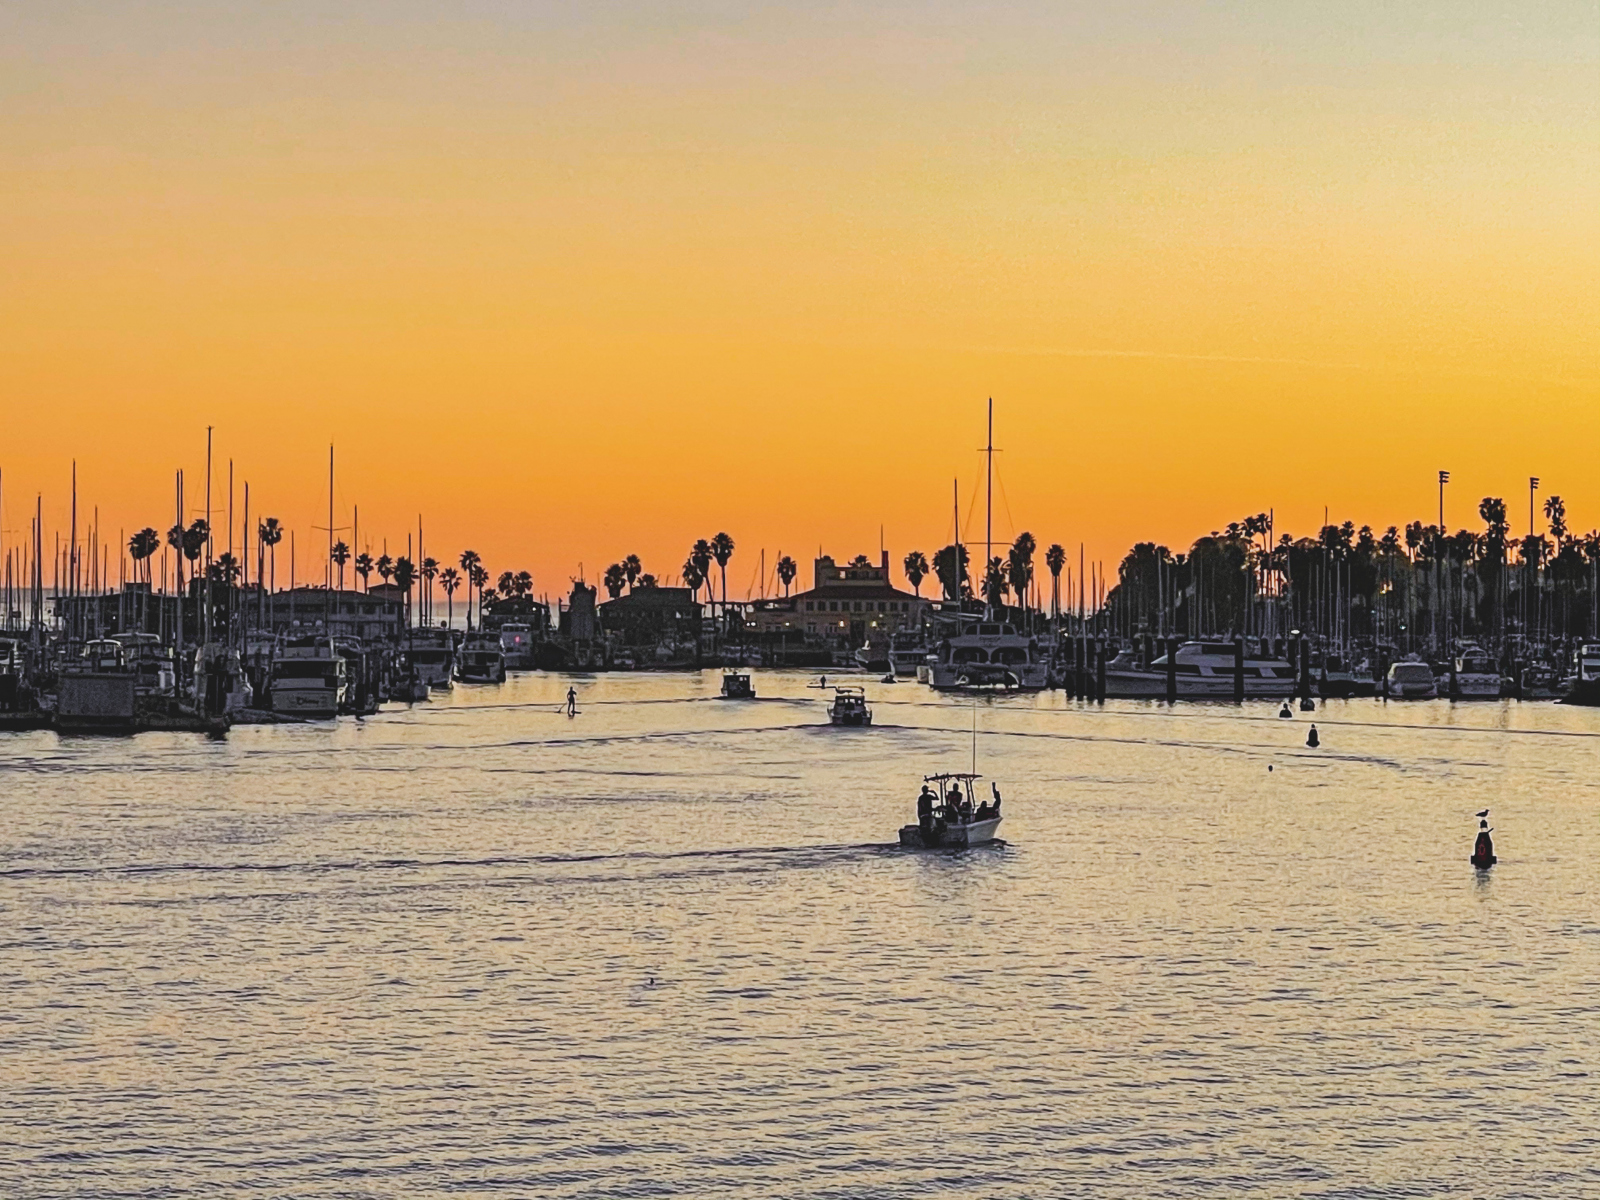 We-always-have-at-least-one-week-in-January-that-feels-like-summer.-Heres-a-look-at-boats-coming-in-to-harbor-at-sunset-in-this-view-from-Stearns-Wharf-Seacoast-SB